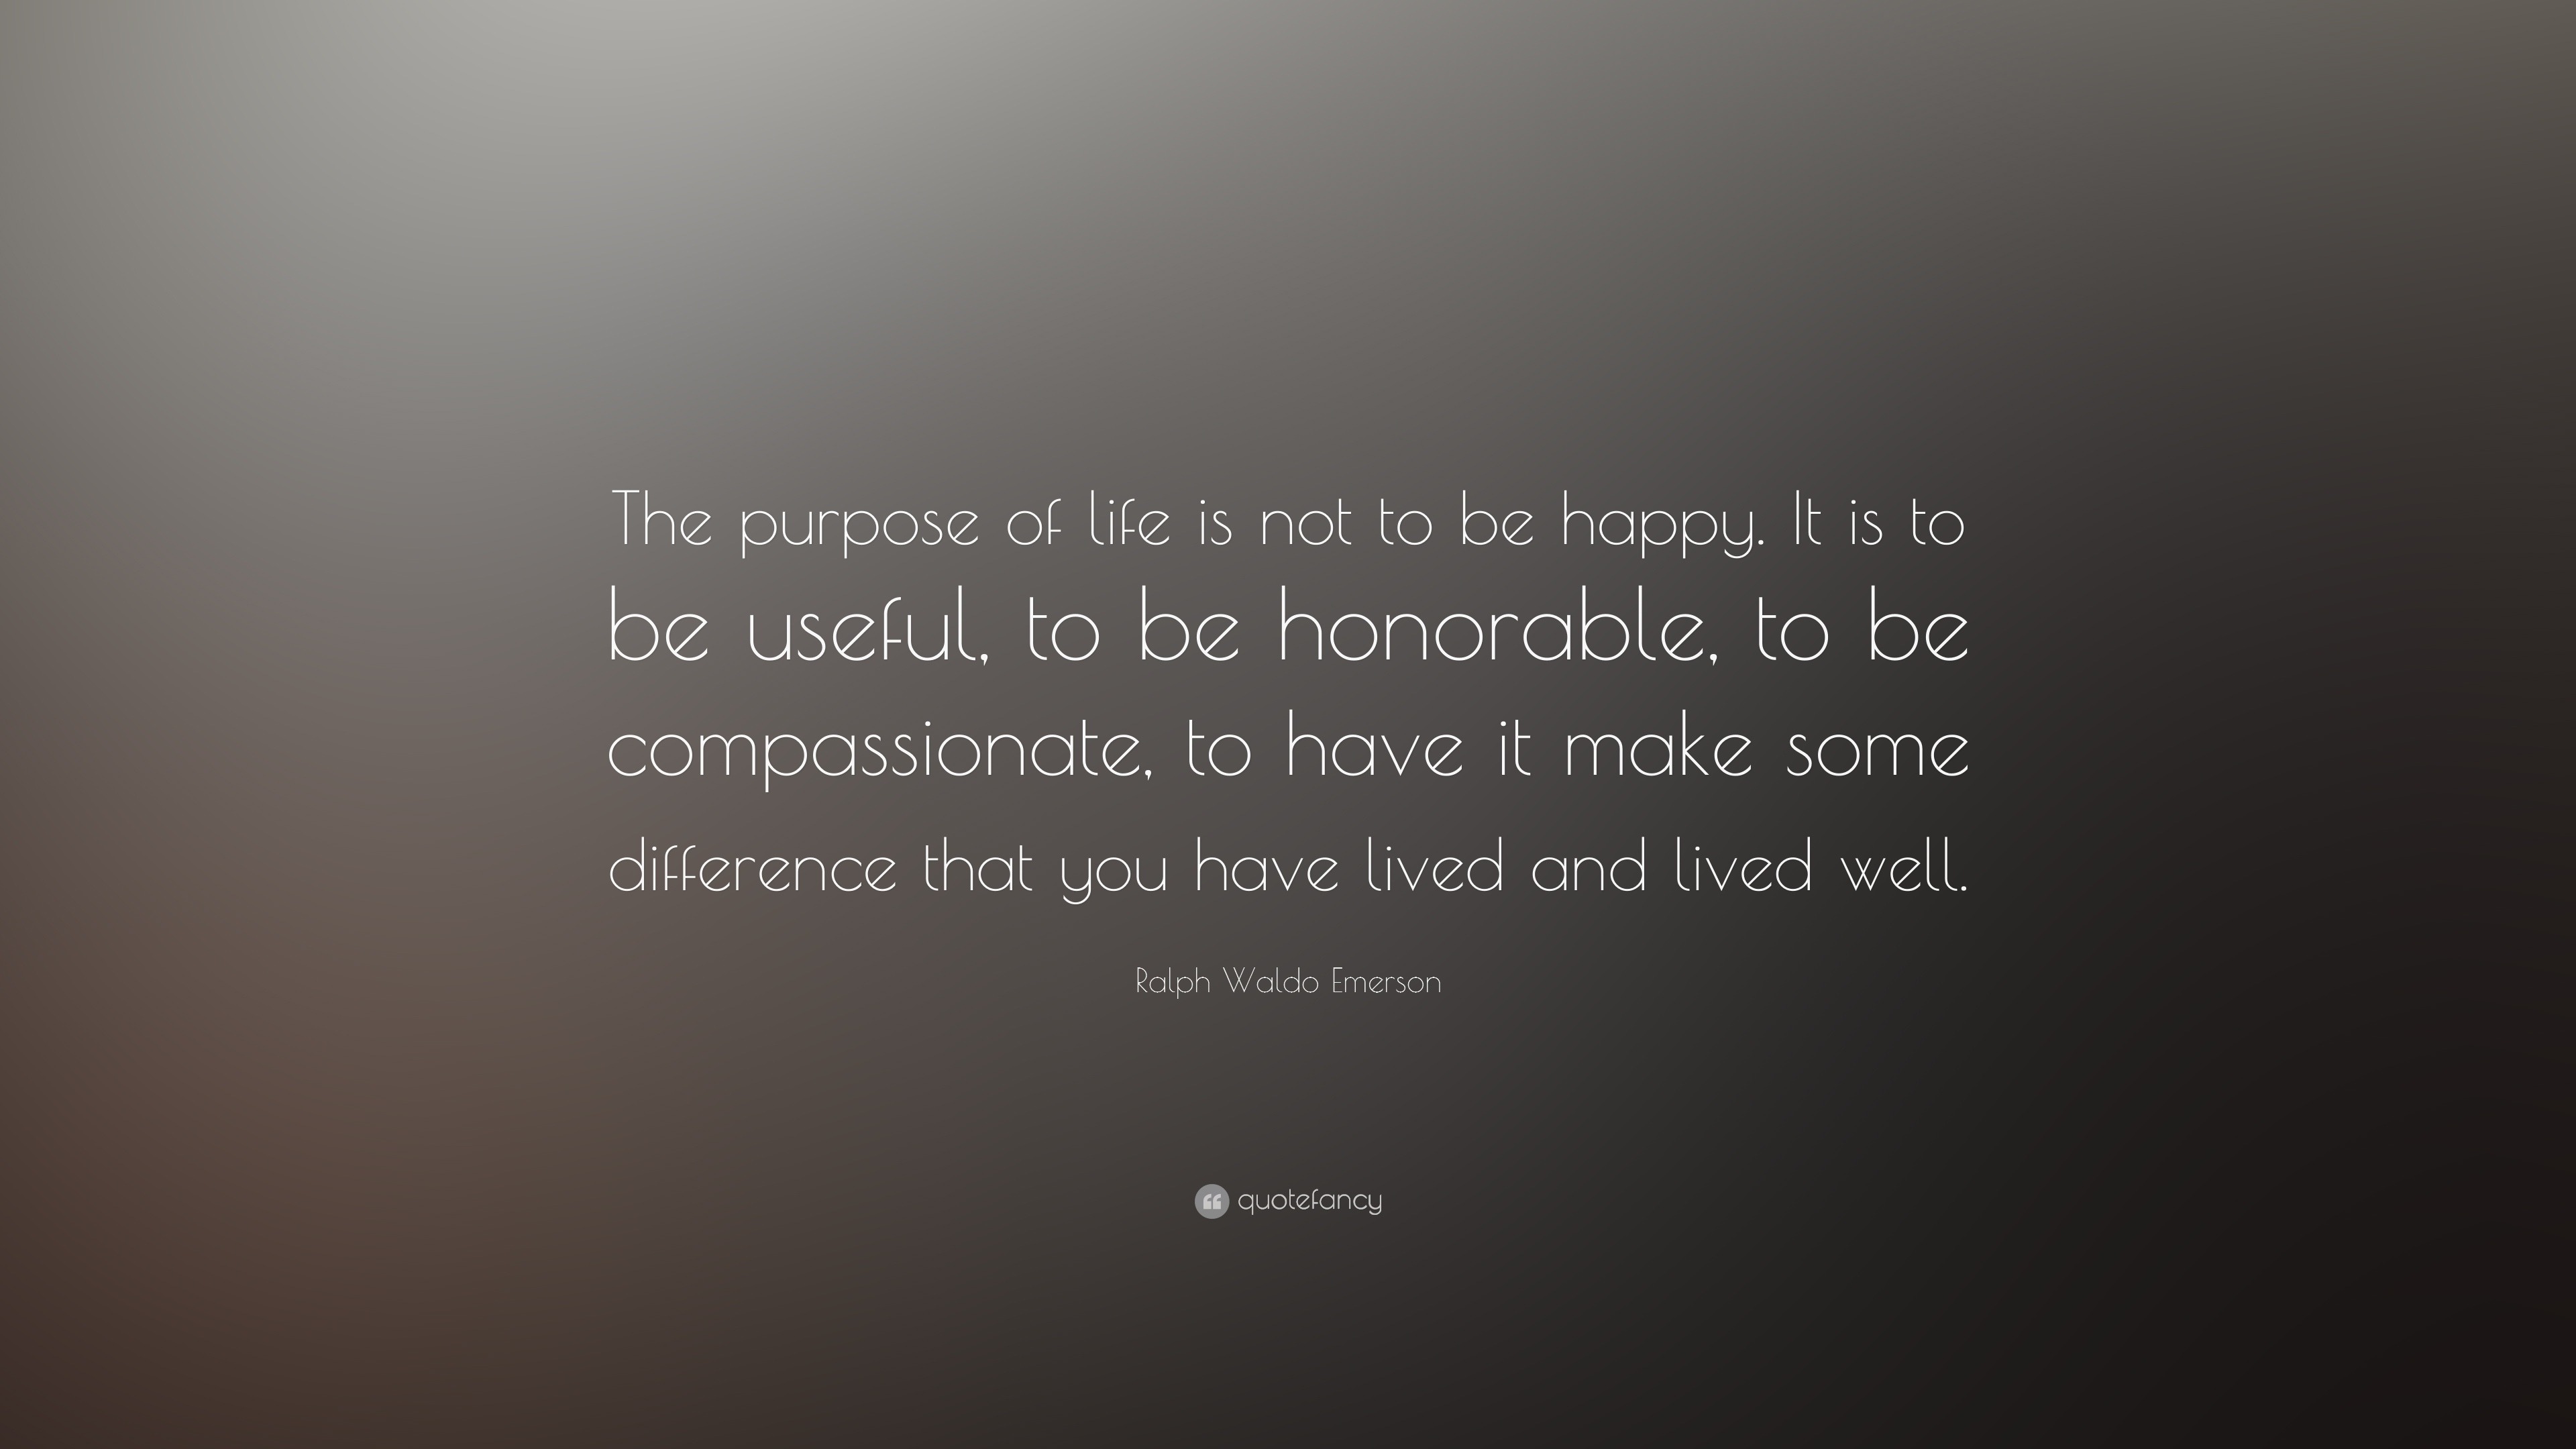 Ralph Waldo Emerson Quote “The purpose of life is not to be happy